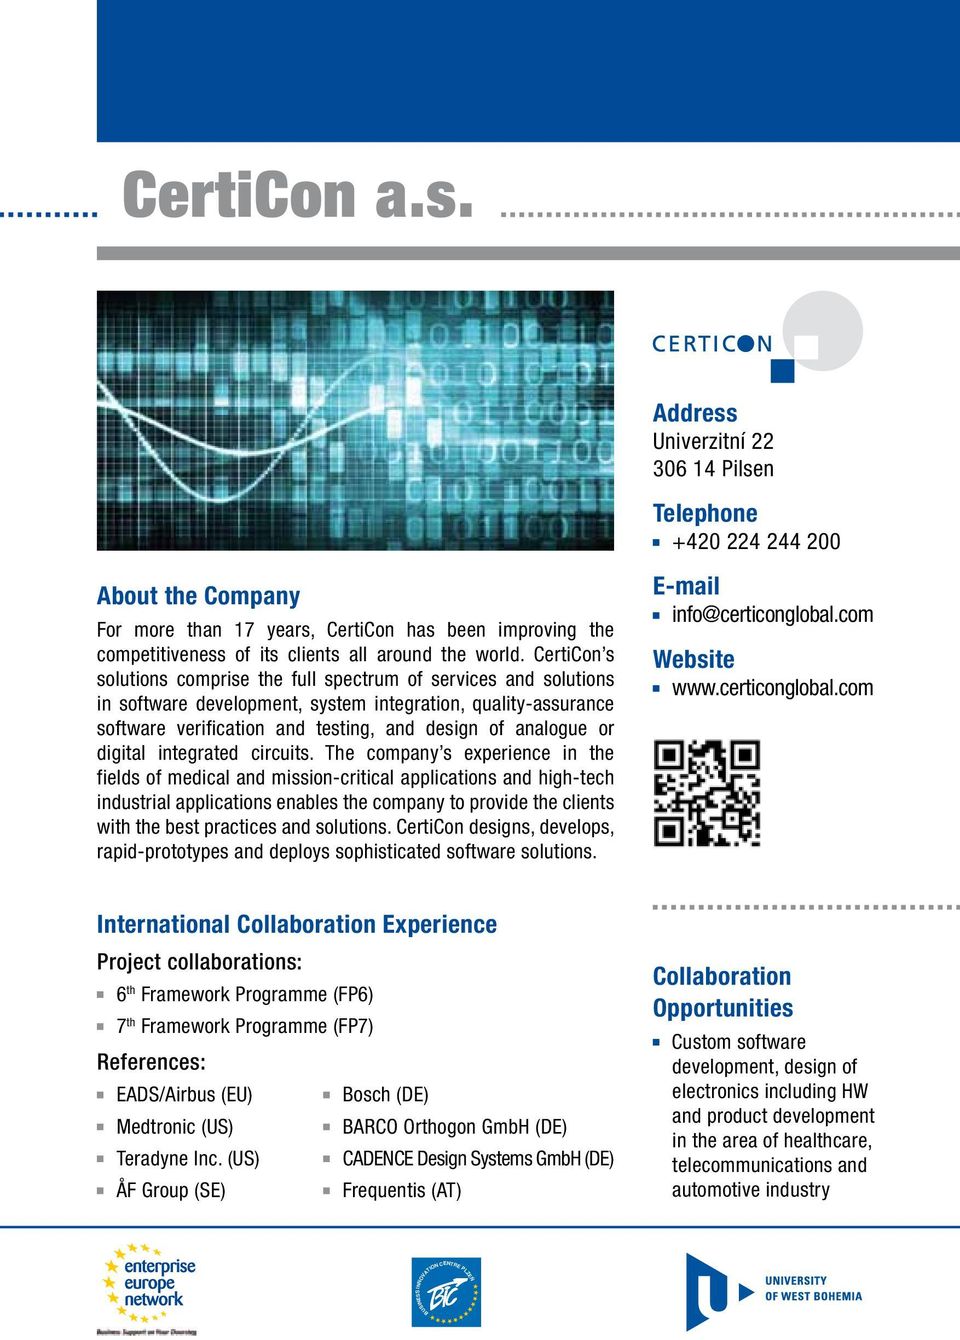 CertiCon s solutions comprise the full spectrum of services and solutions in software development, system integration, quality-assurance software verification and testing, and design of analogue or